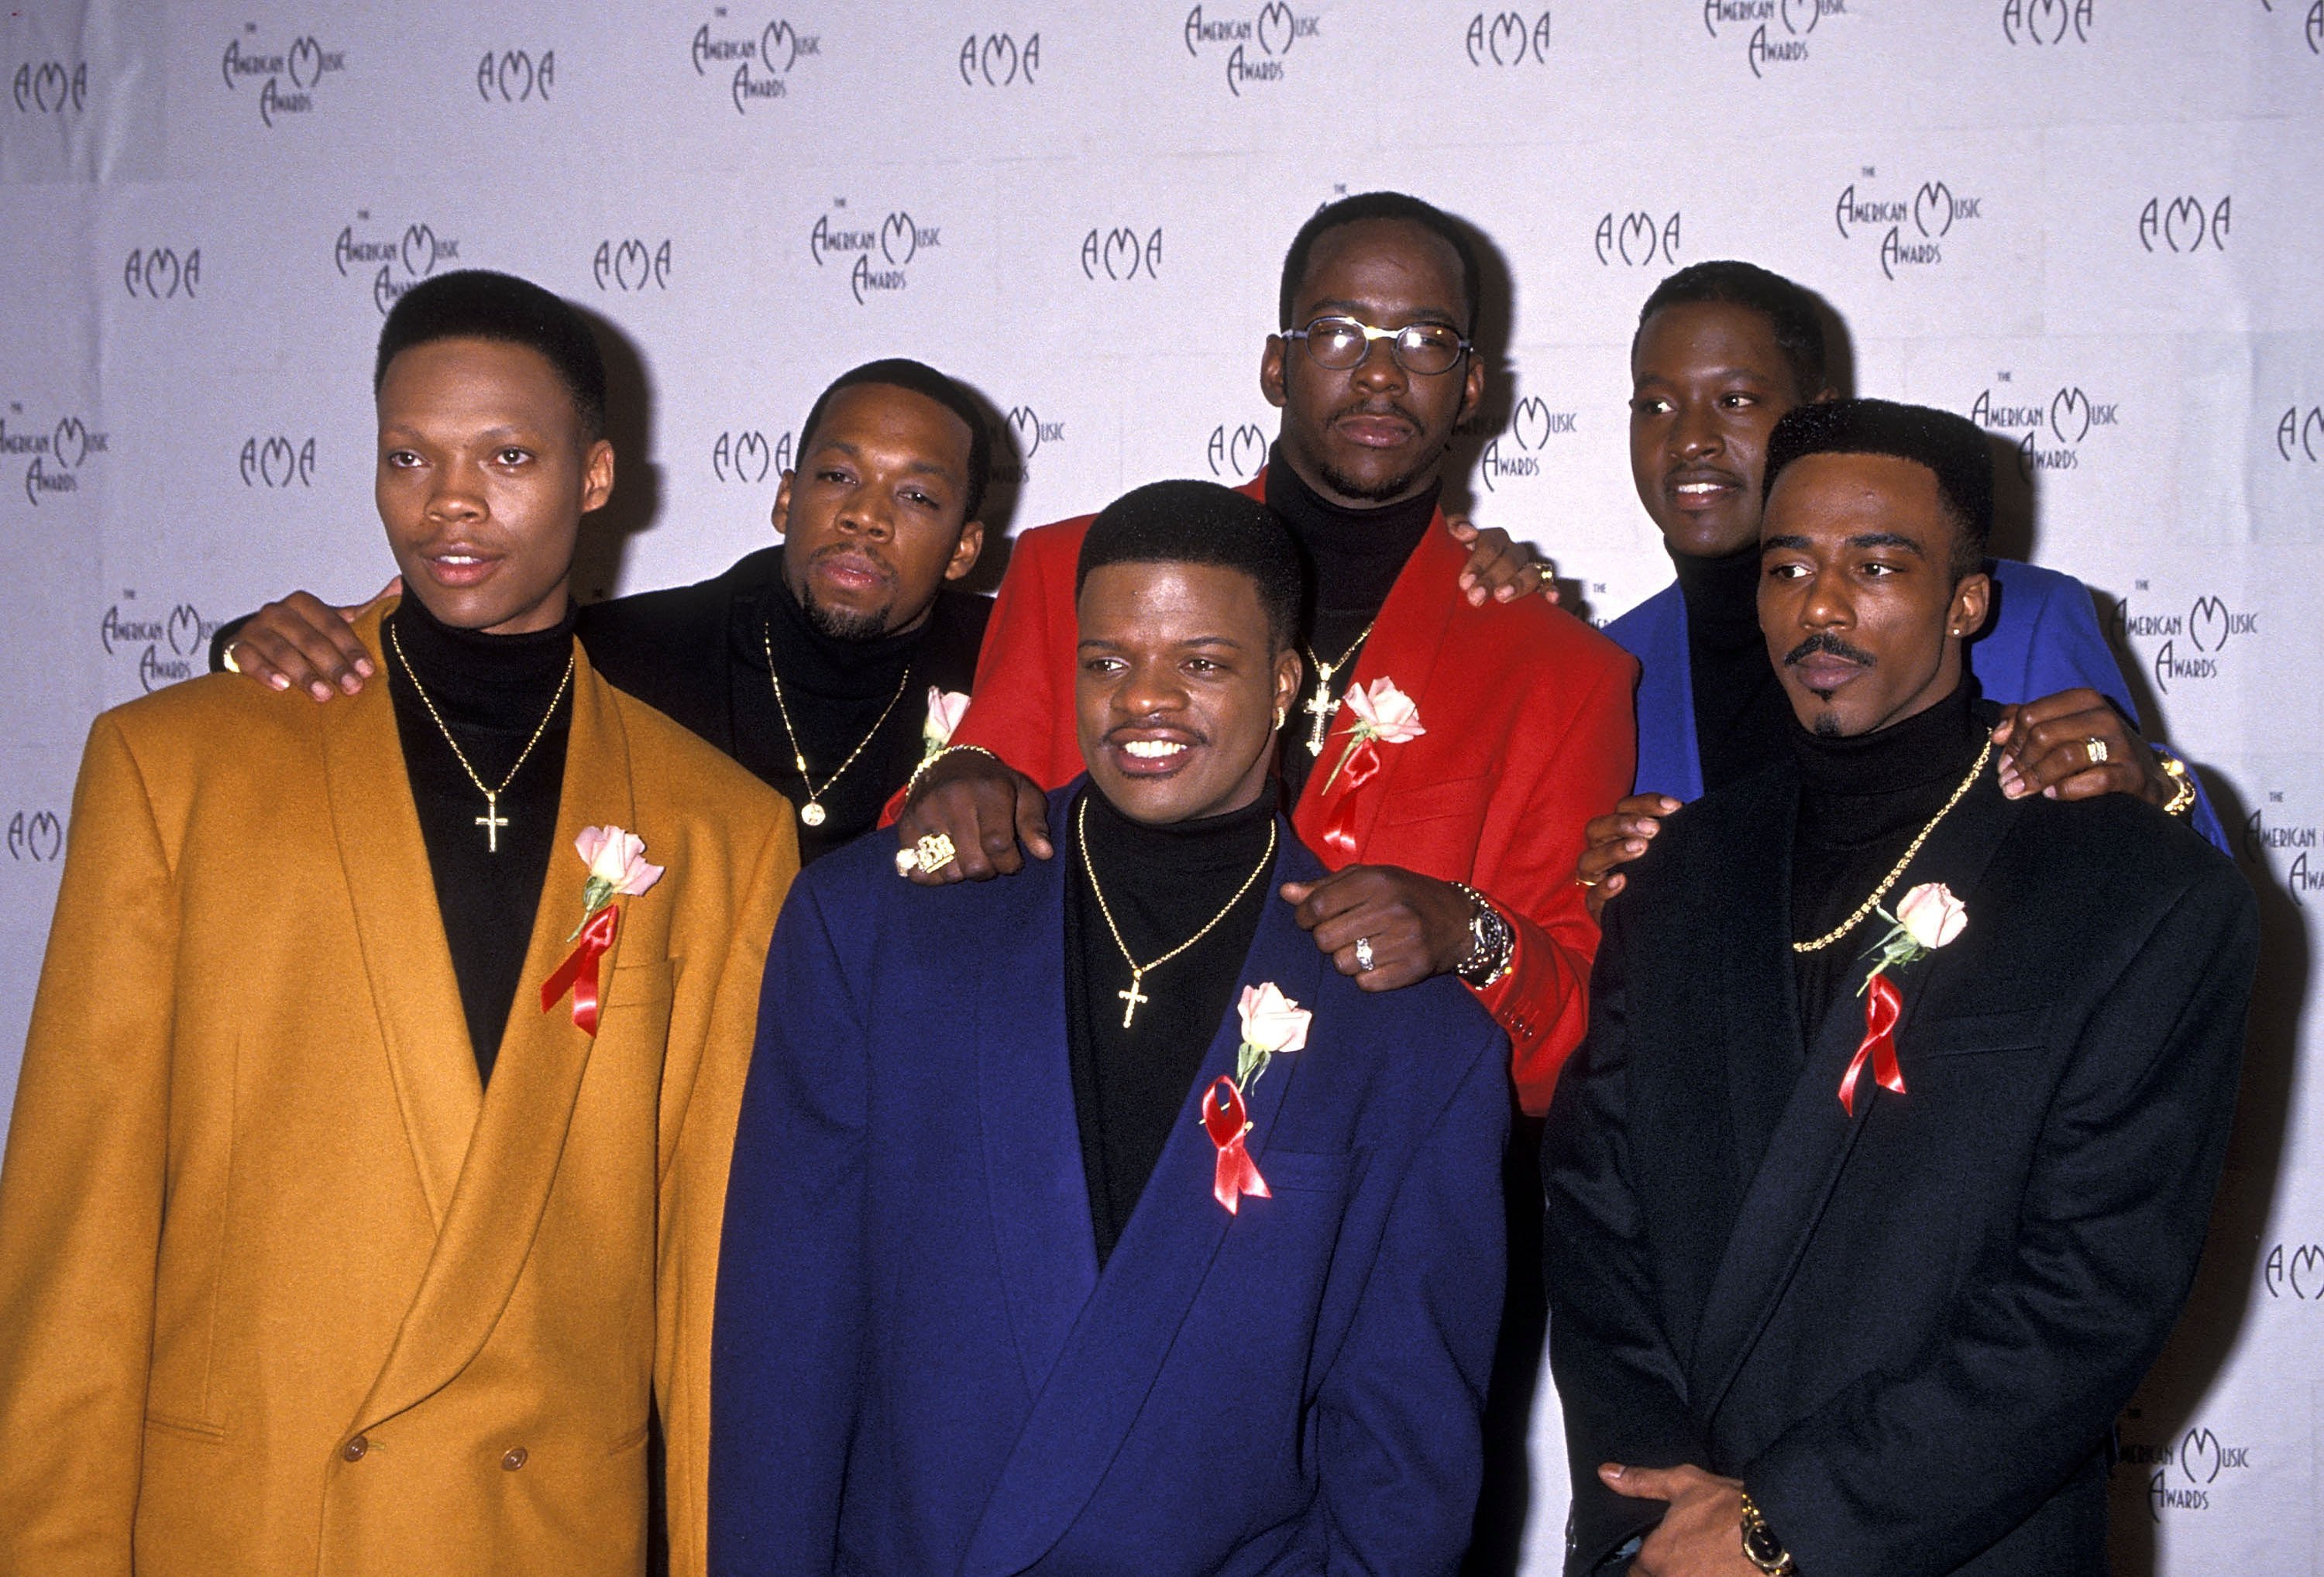 Which New Edition Group Member Has the Highest Net Worth?